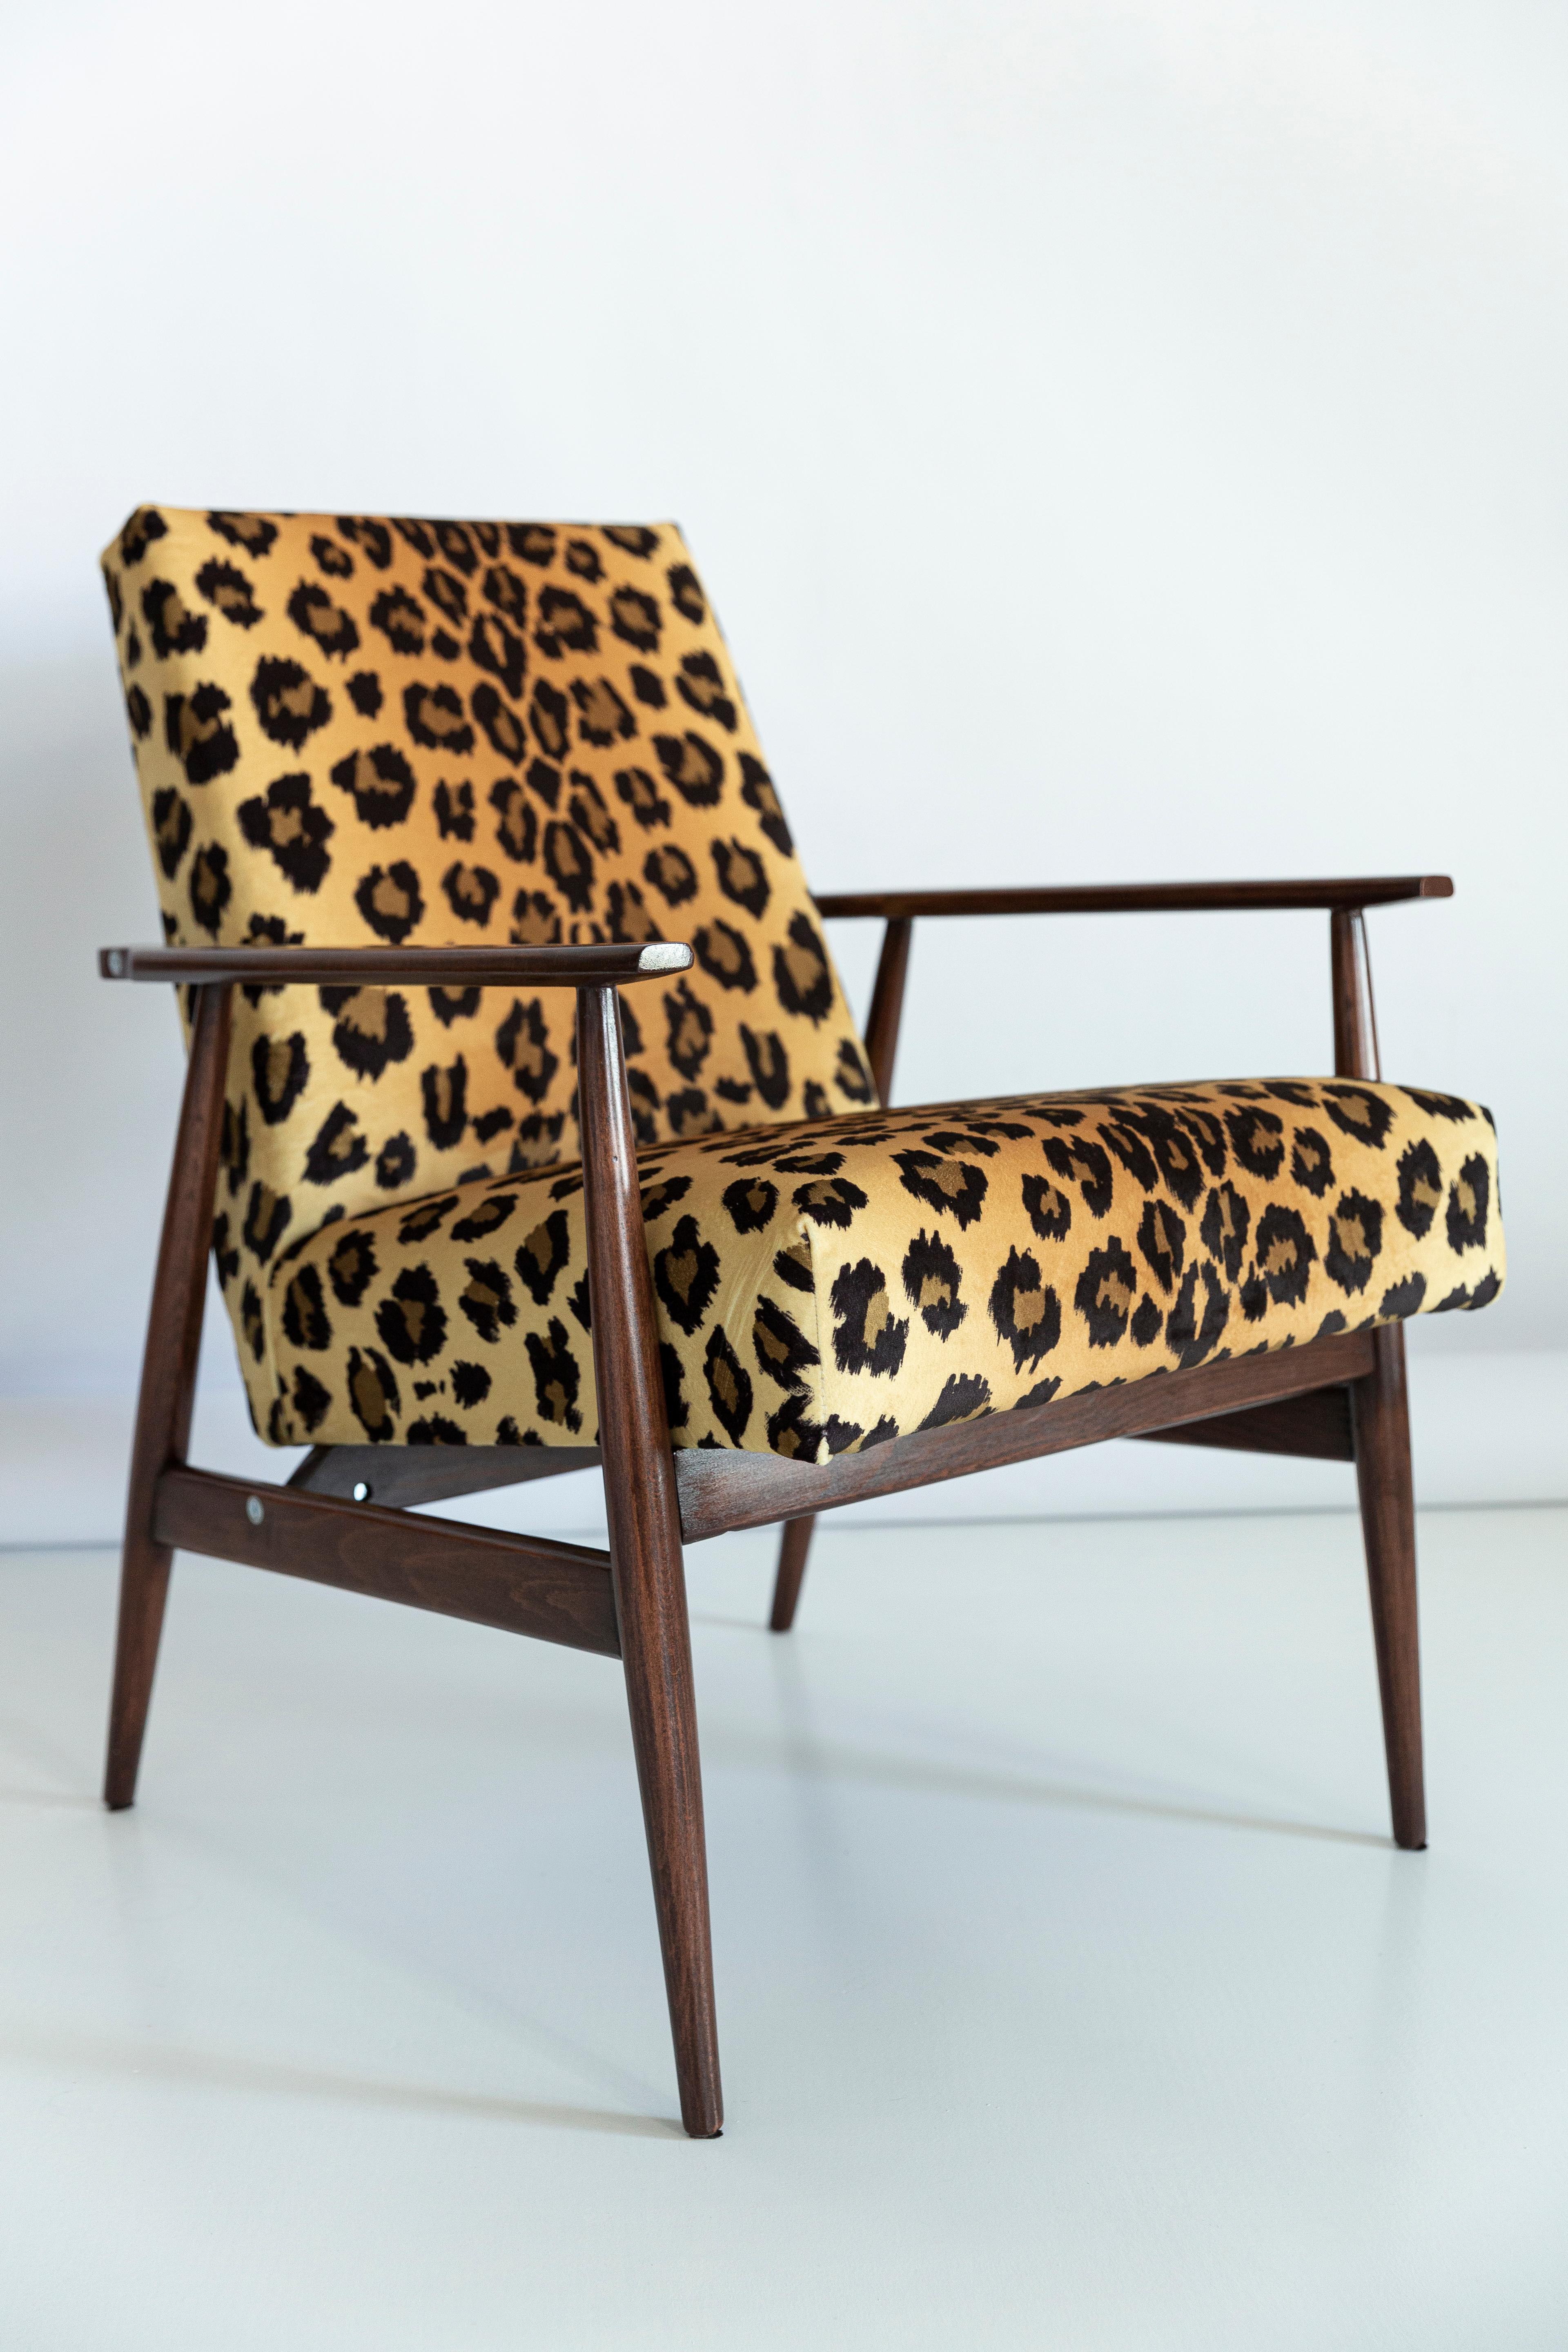 Hand-Crafted Set of Four Midcentury Leopard Print Velvet Dante Armchairs, H. Lis, 1960s For Sale